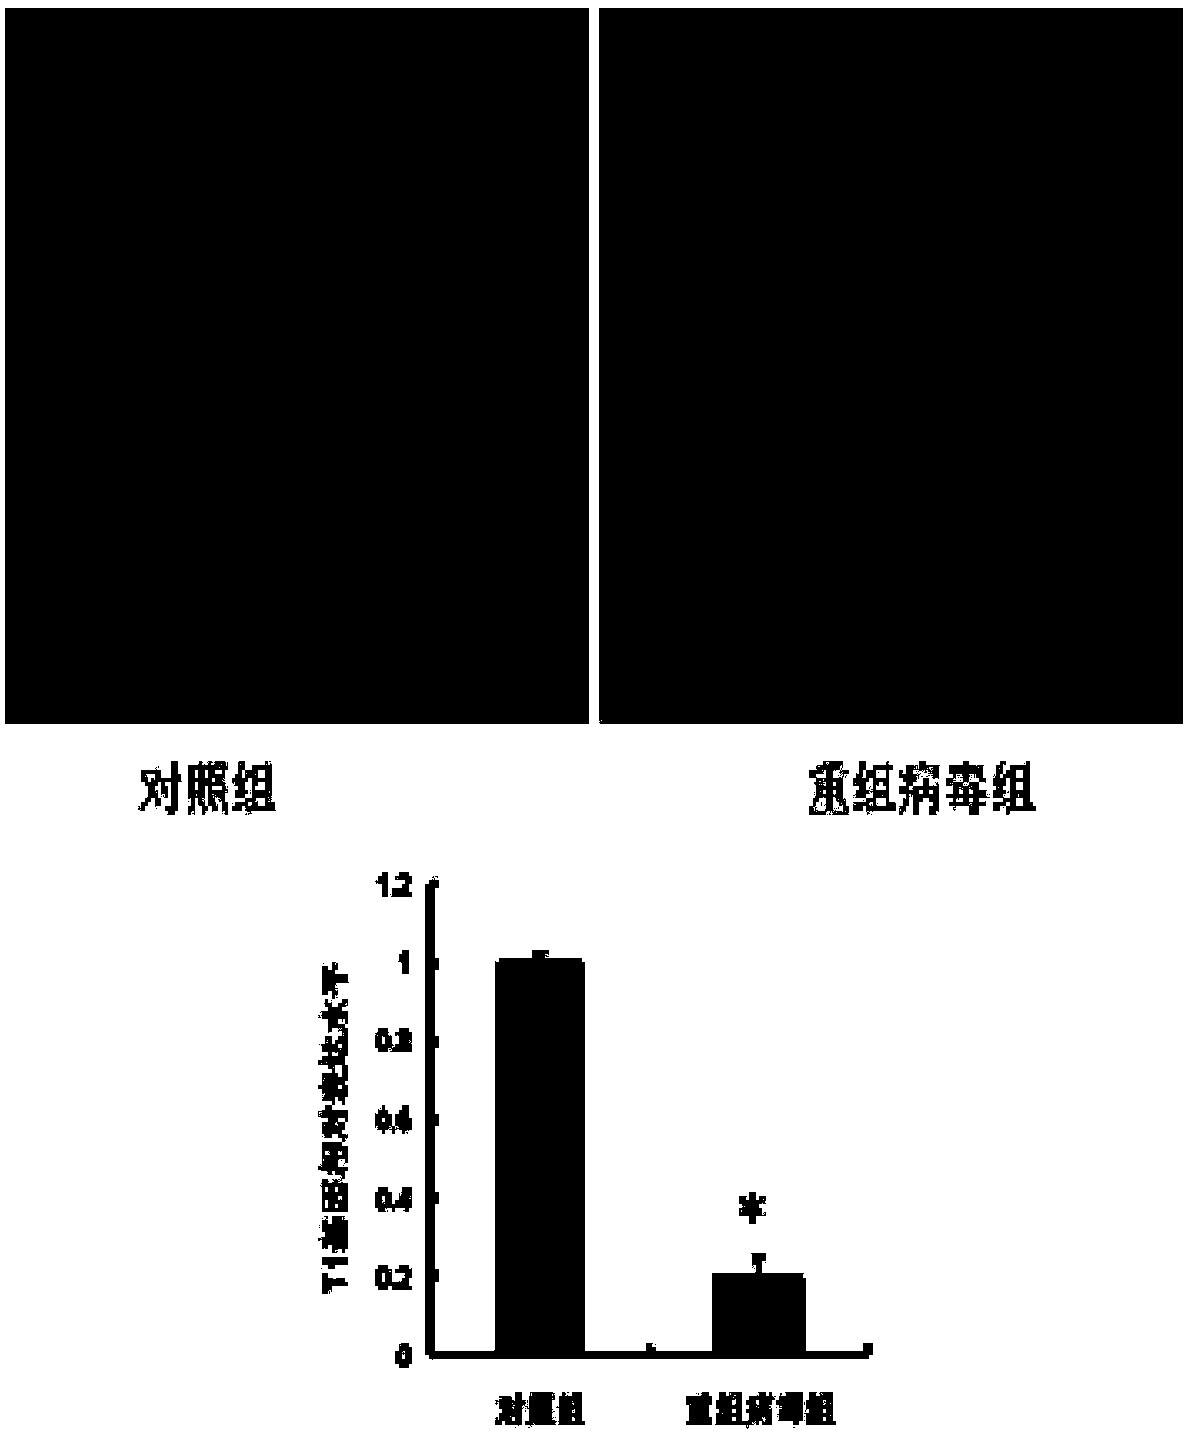 Recombinant virus silencing T1 protein, and construction method and application thereof